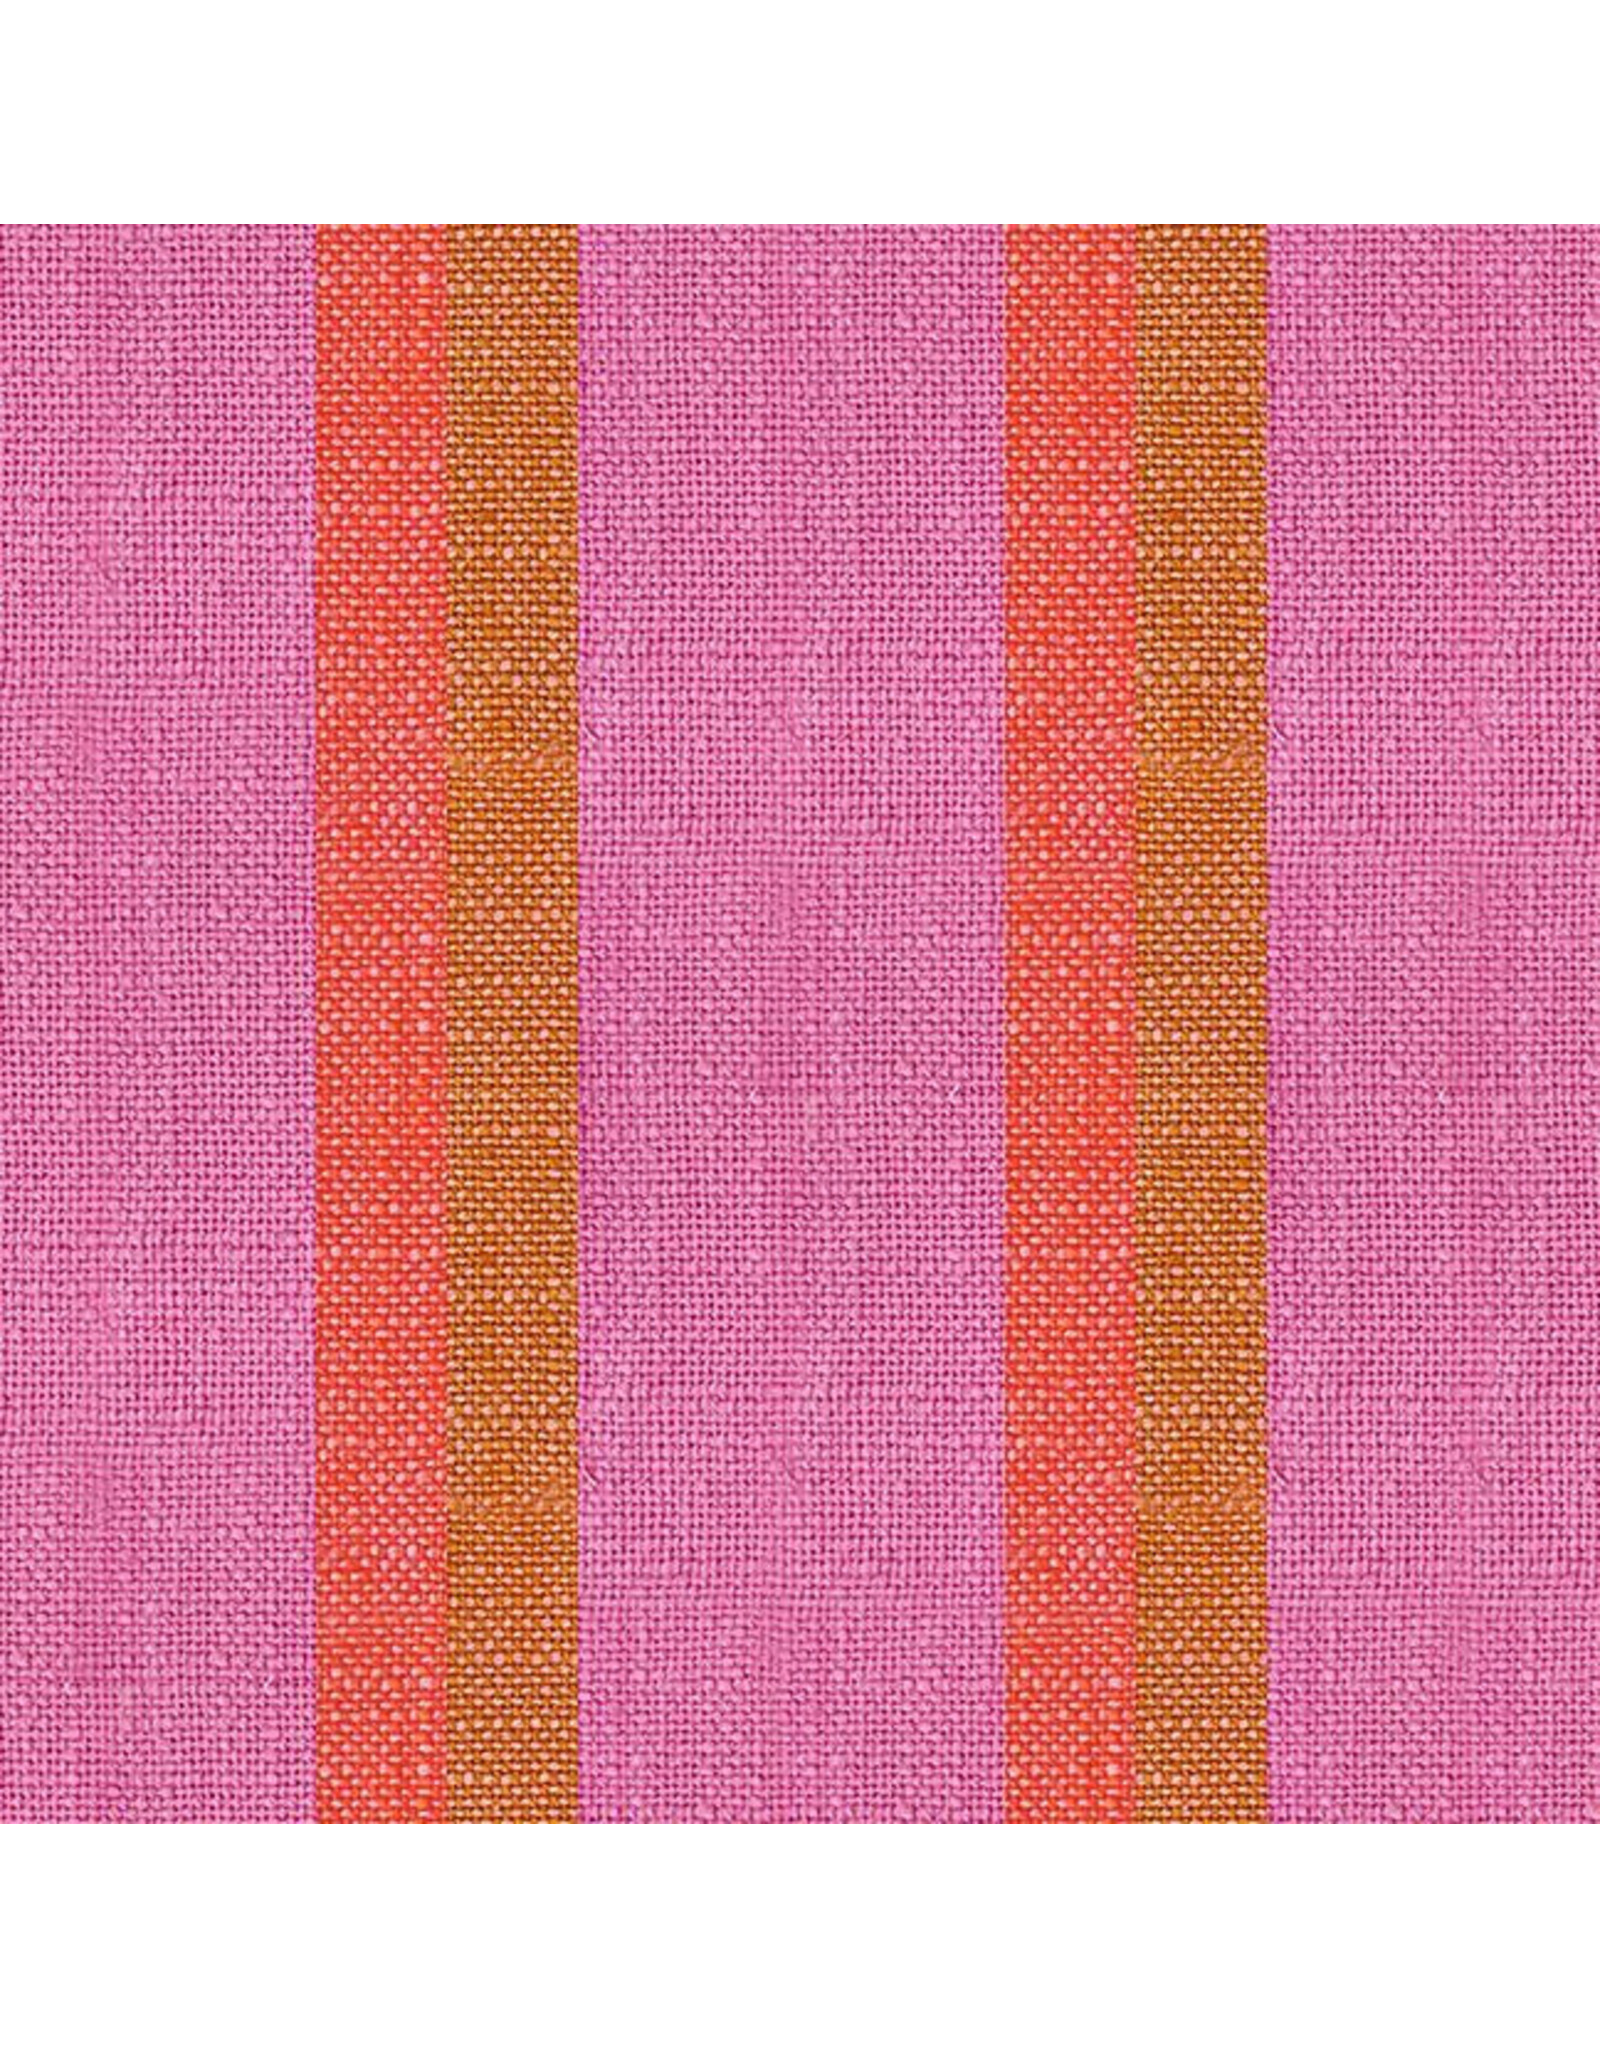 Alexia Abegg Jolie Toweling, Apron Stripe in Pink, 16" wide, sold by the yard